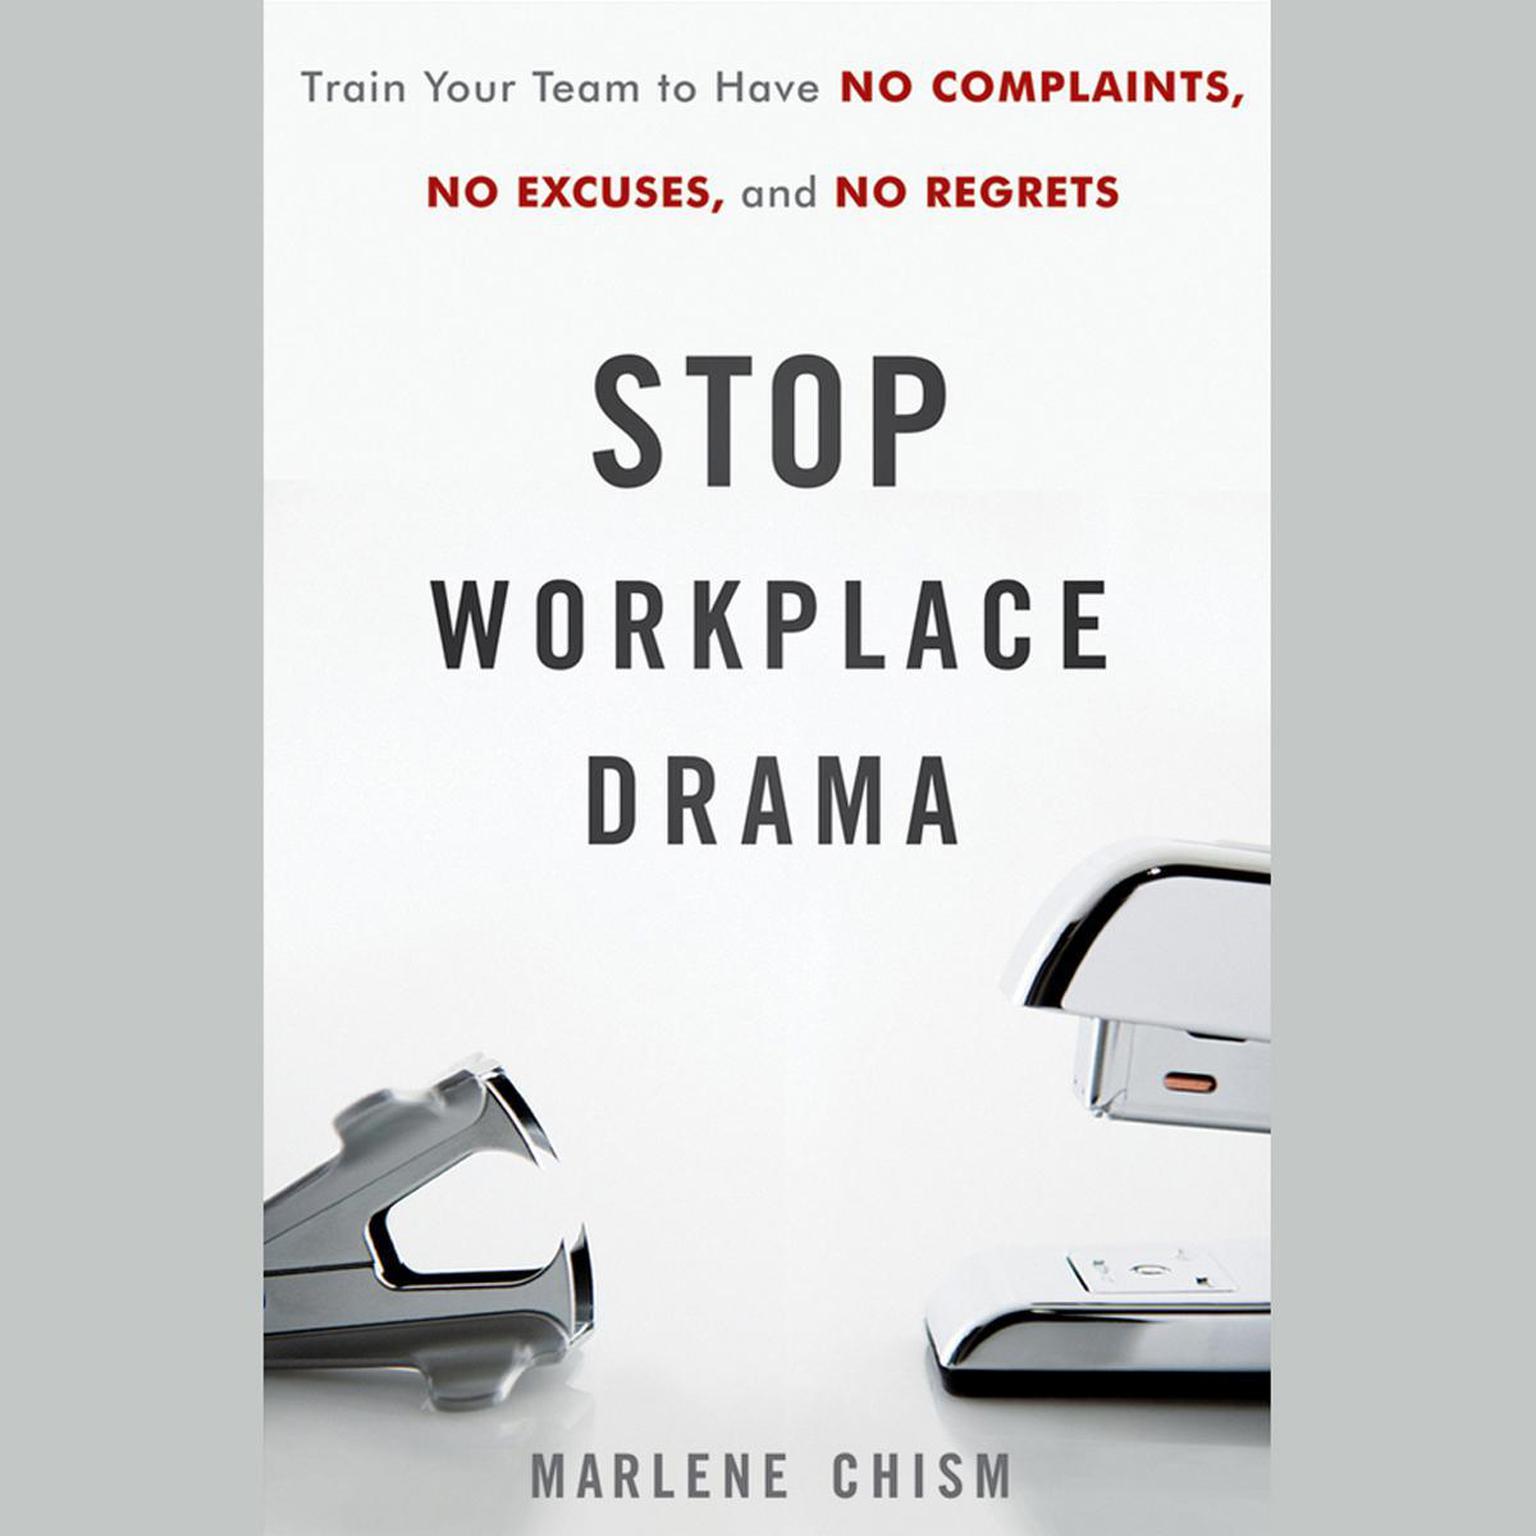 Stop Workplace Drama: Train Your Team to have No Complaints, No Excuses, and No Regrets Audiobook, by Marlene Chism